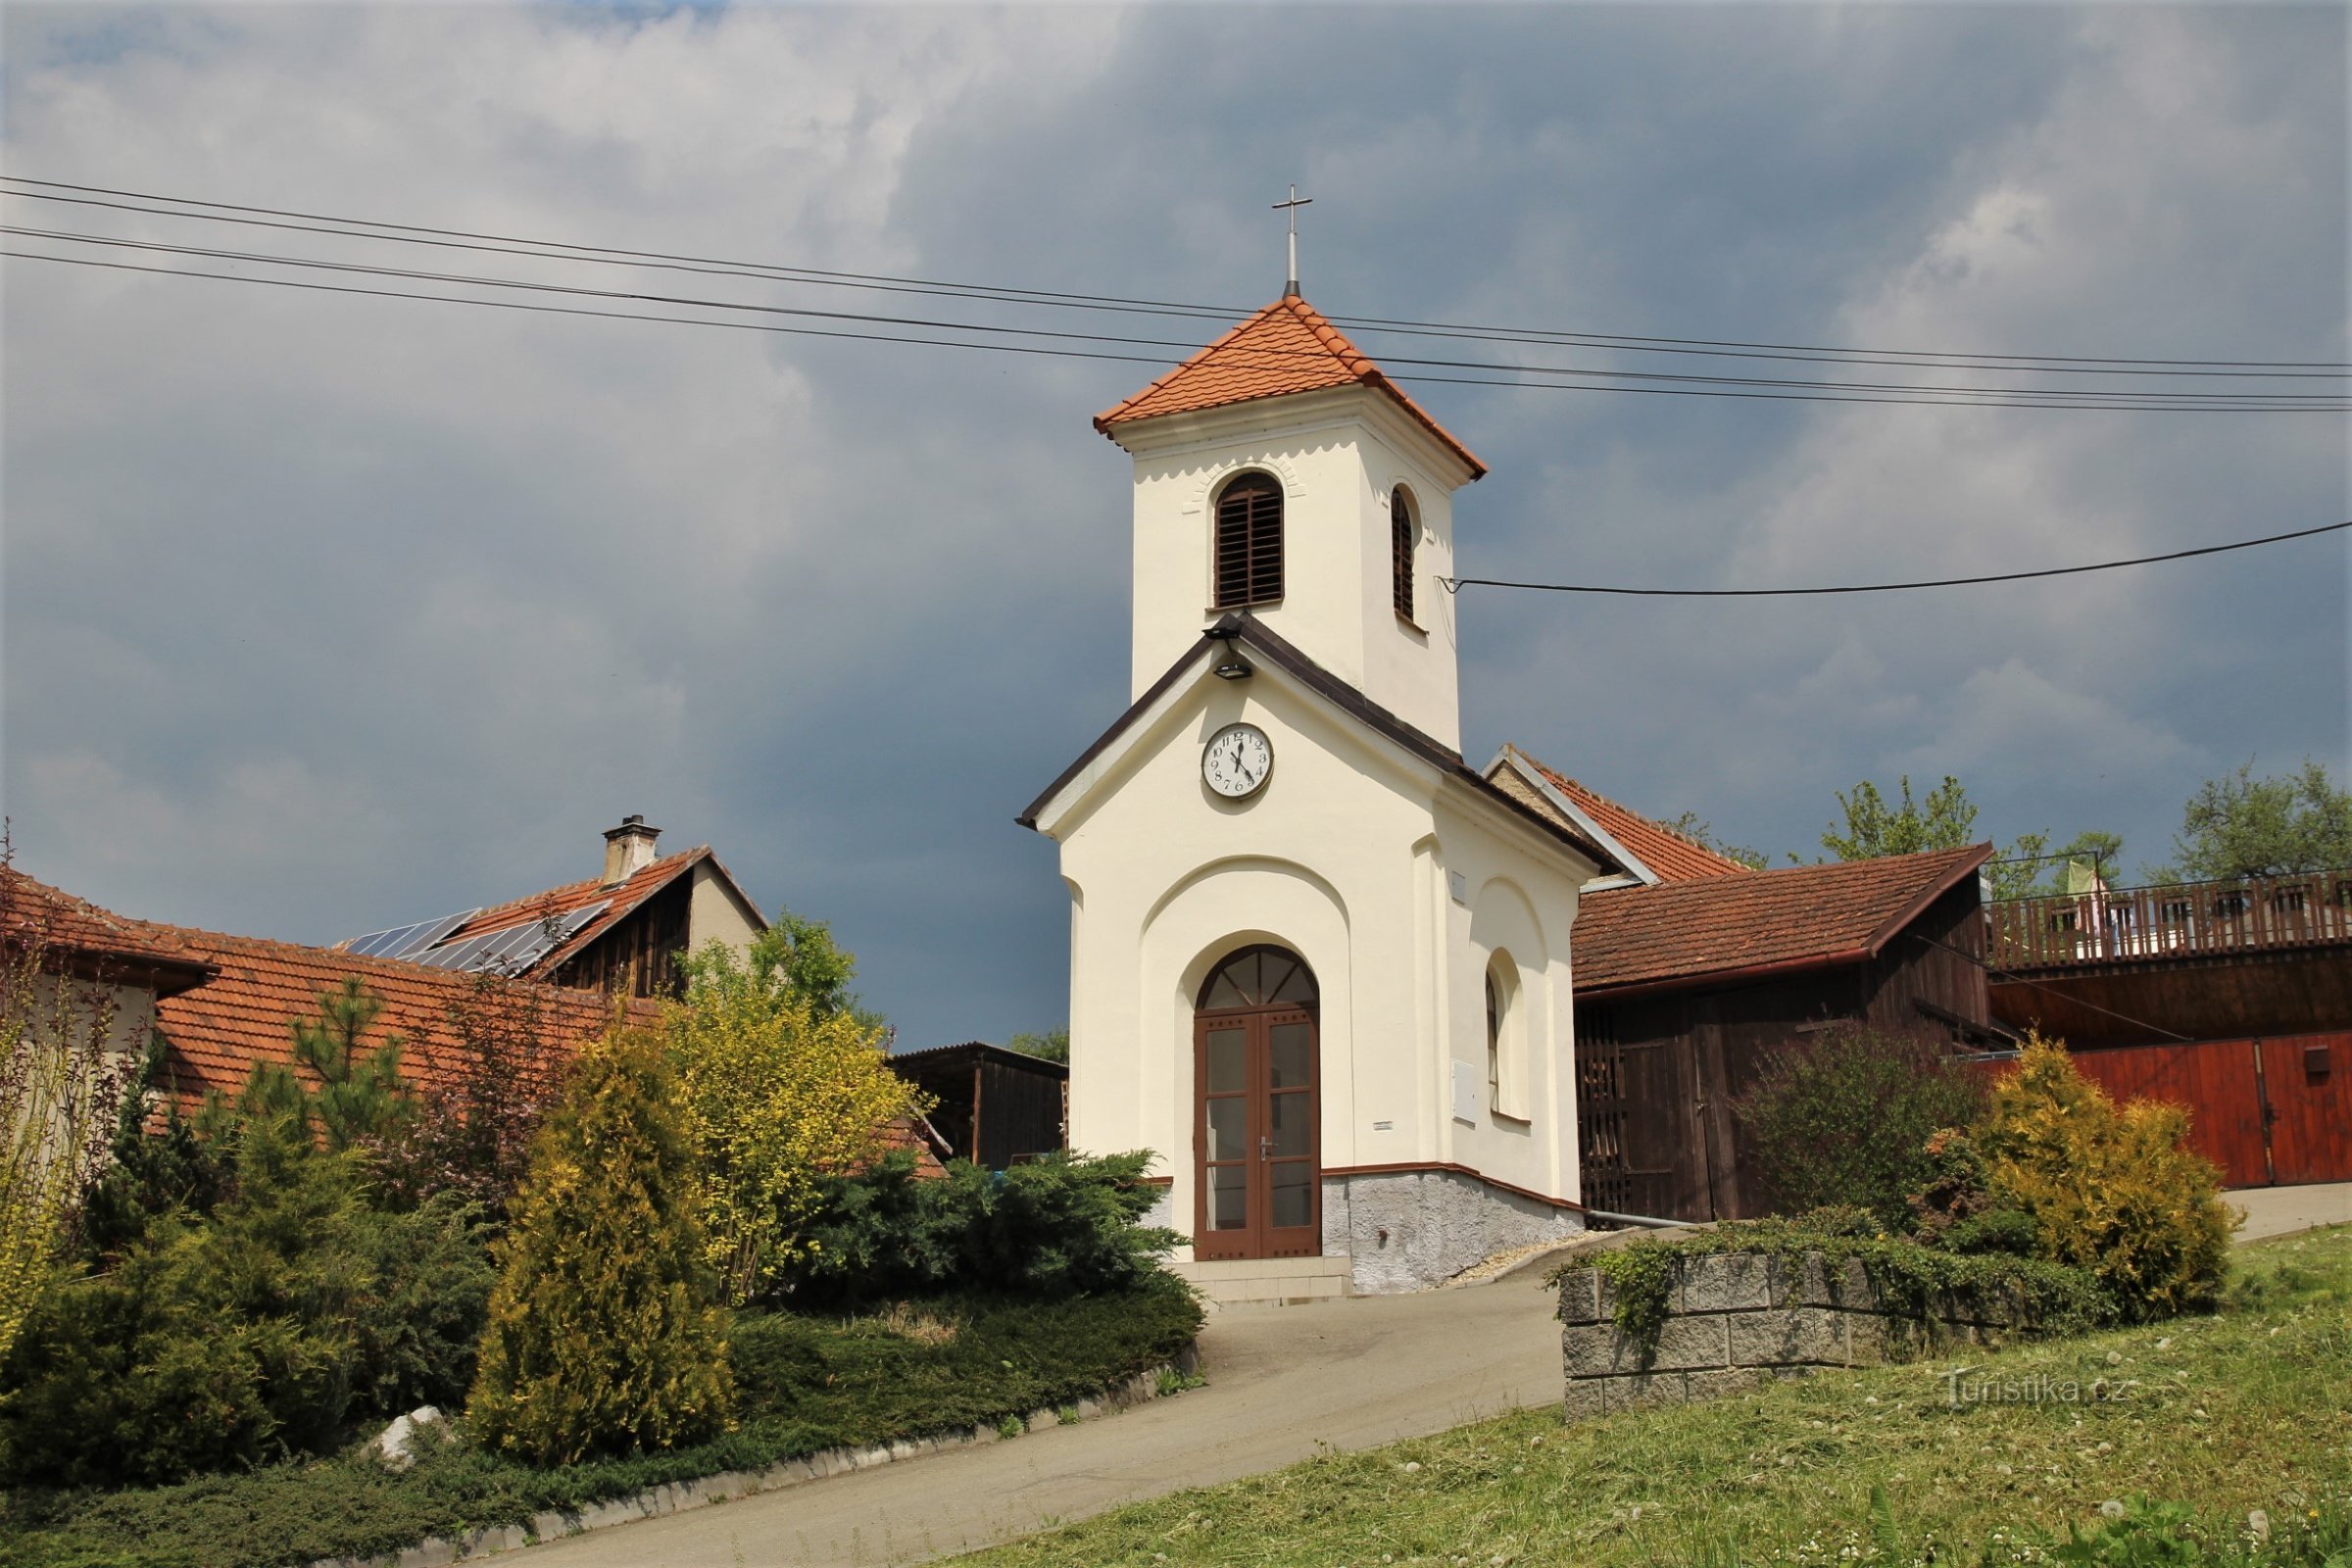 Chapel of St. Lily